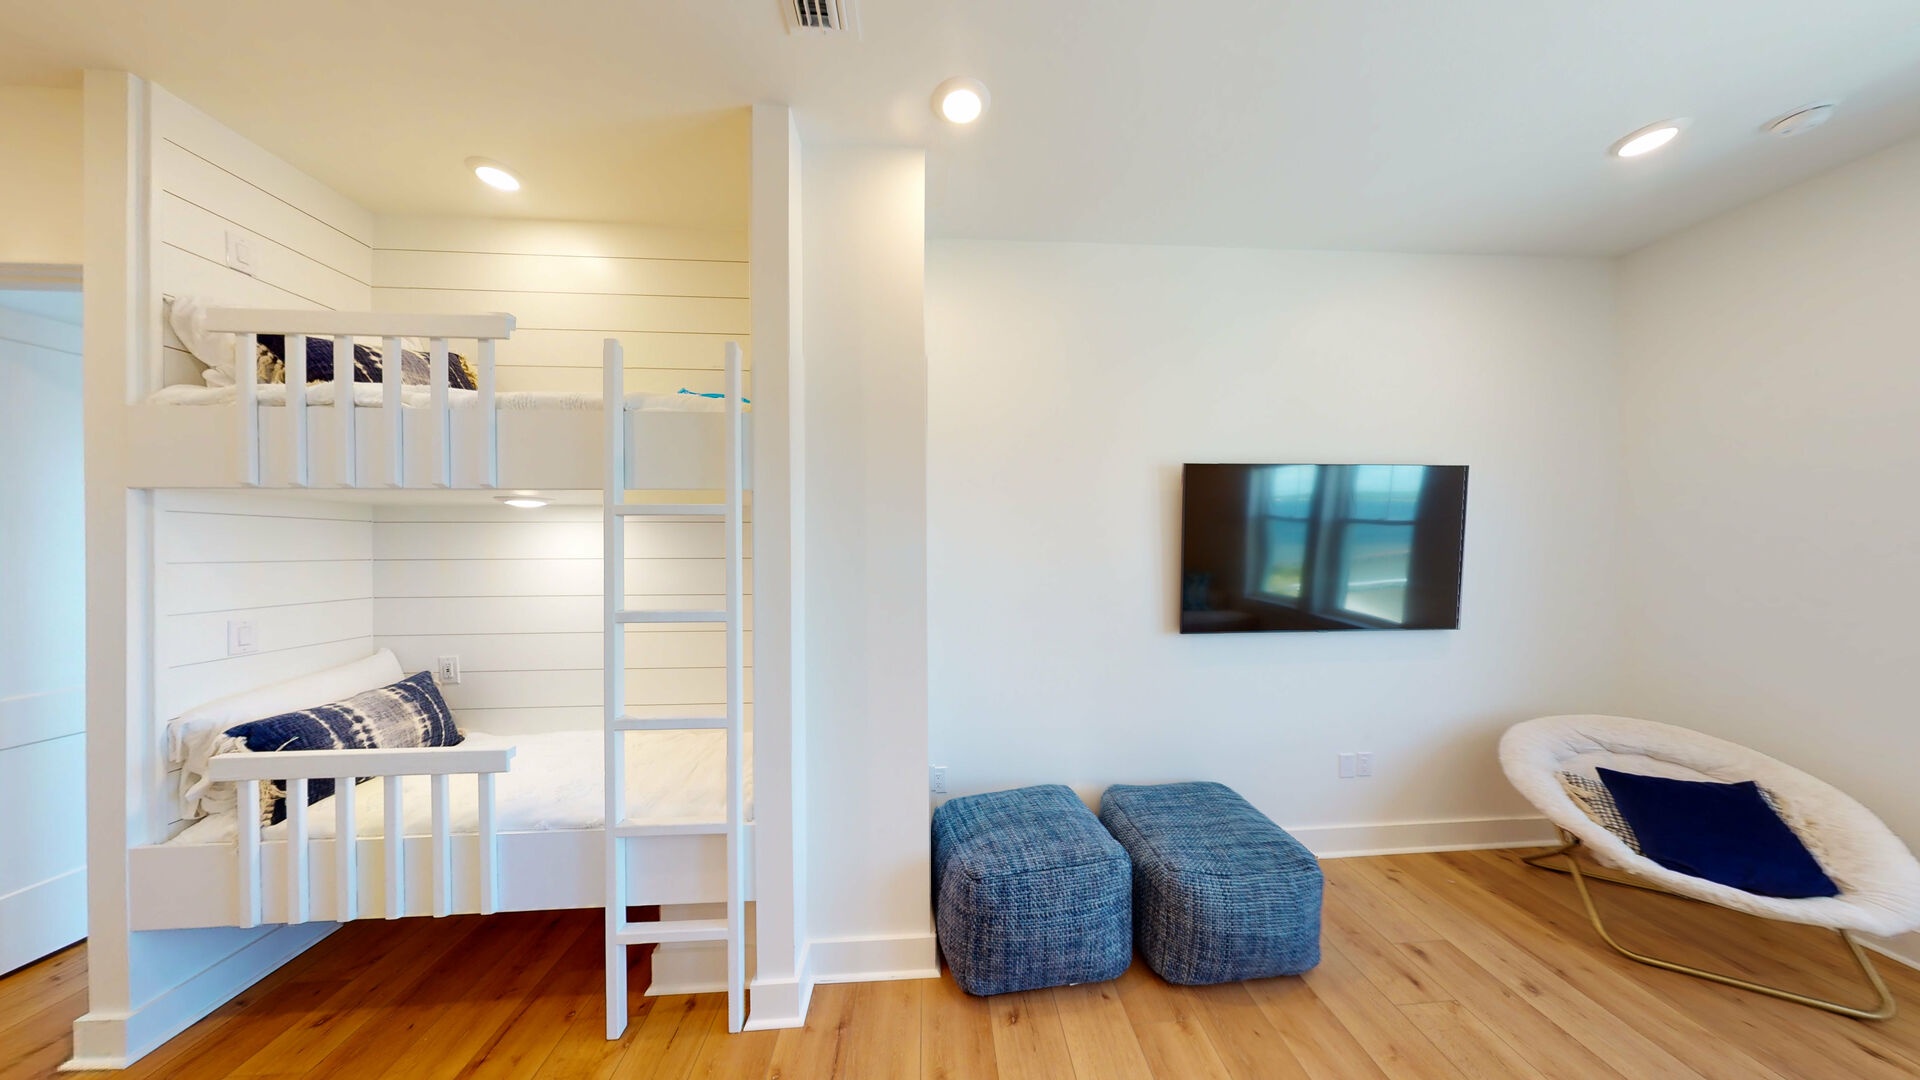 There are 2 twin built-in bunks and a half bath located in the open 2nd floor living area